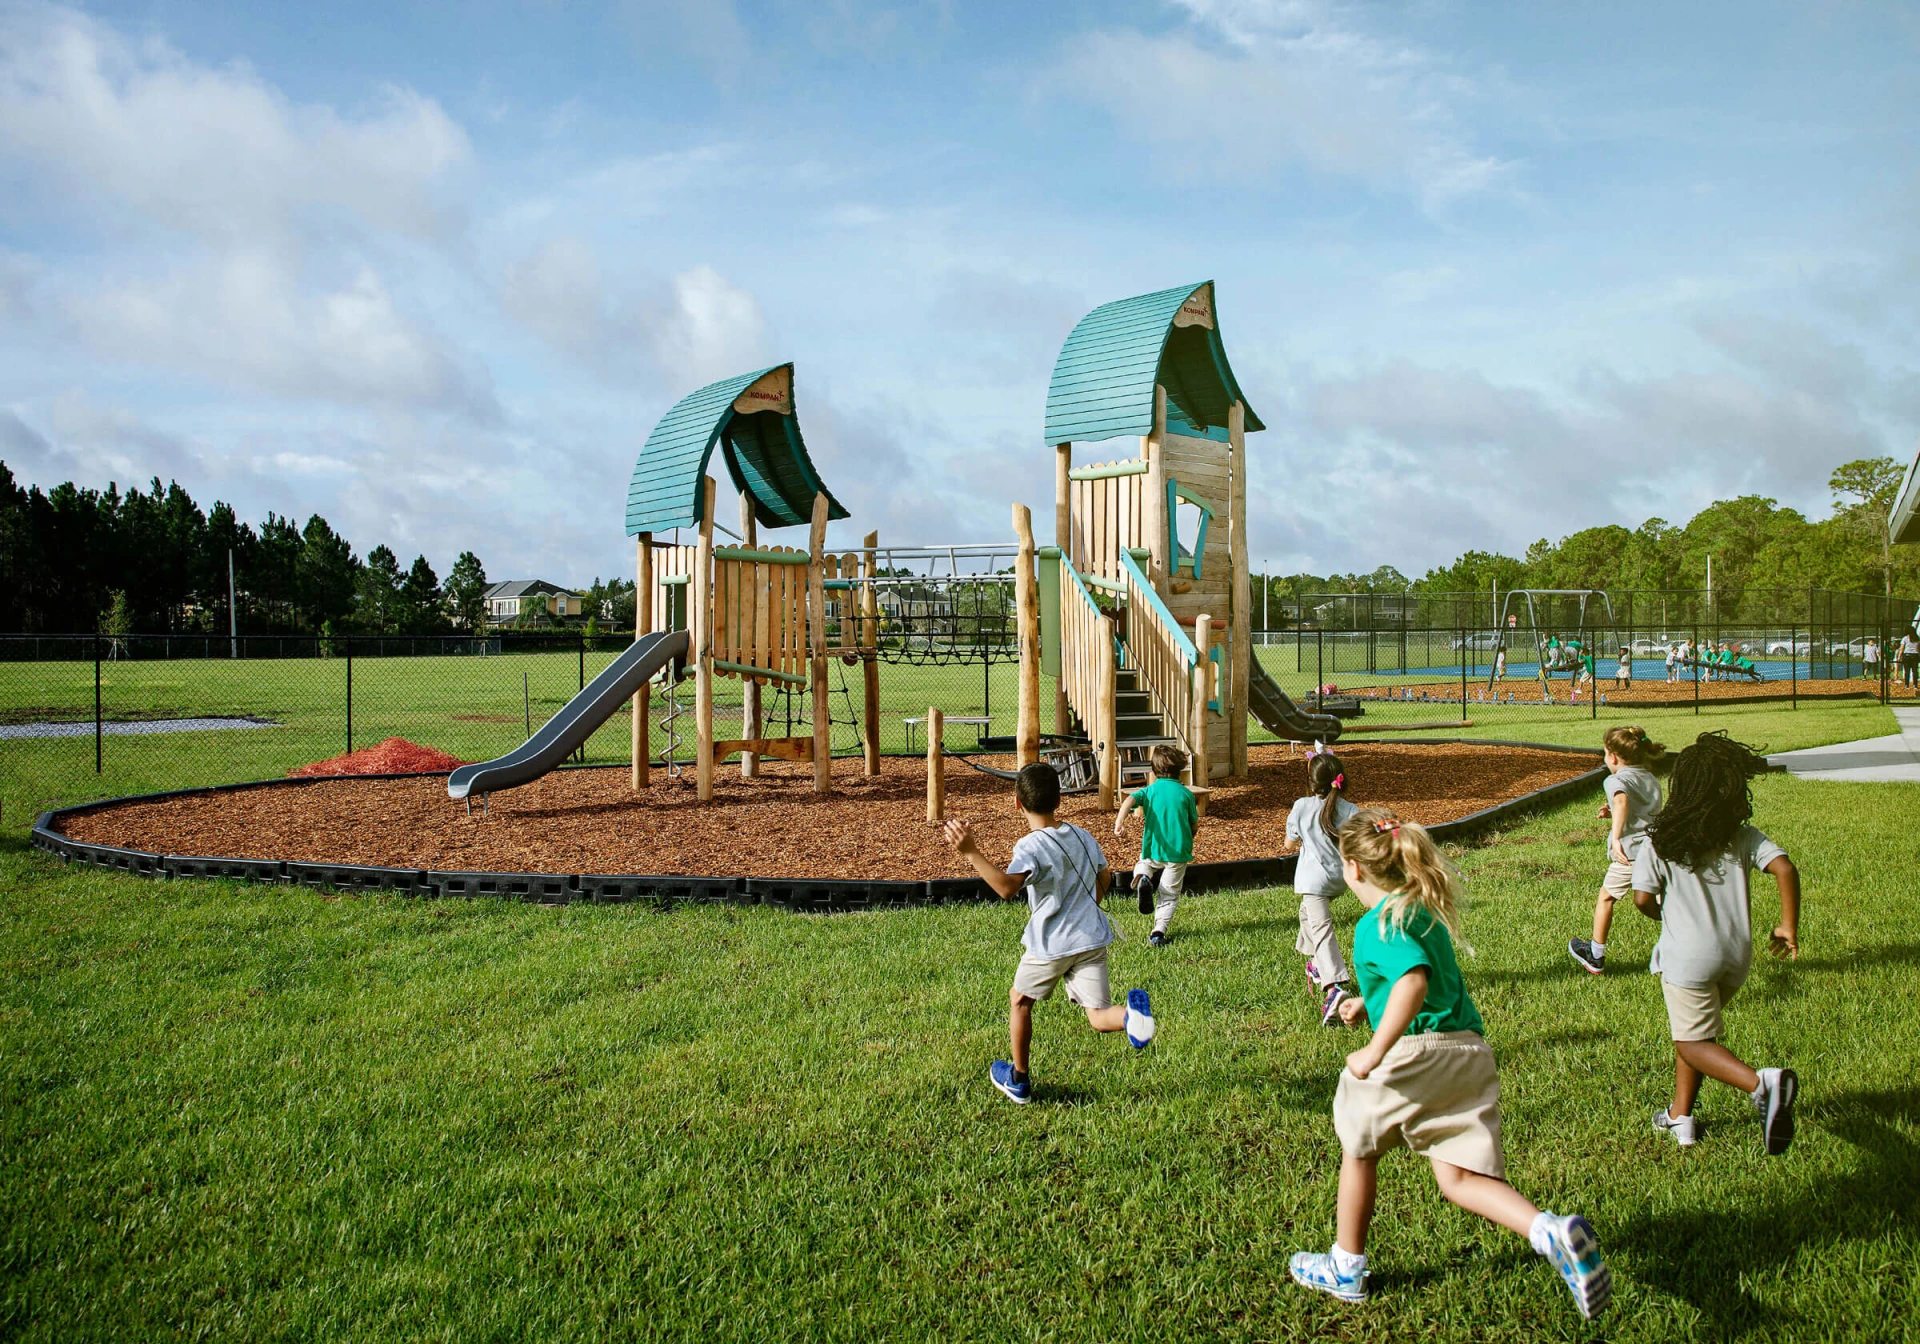 Students running out to a playground during recess